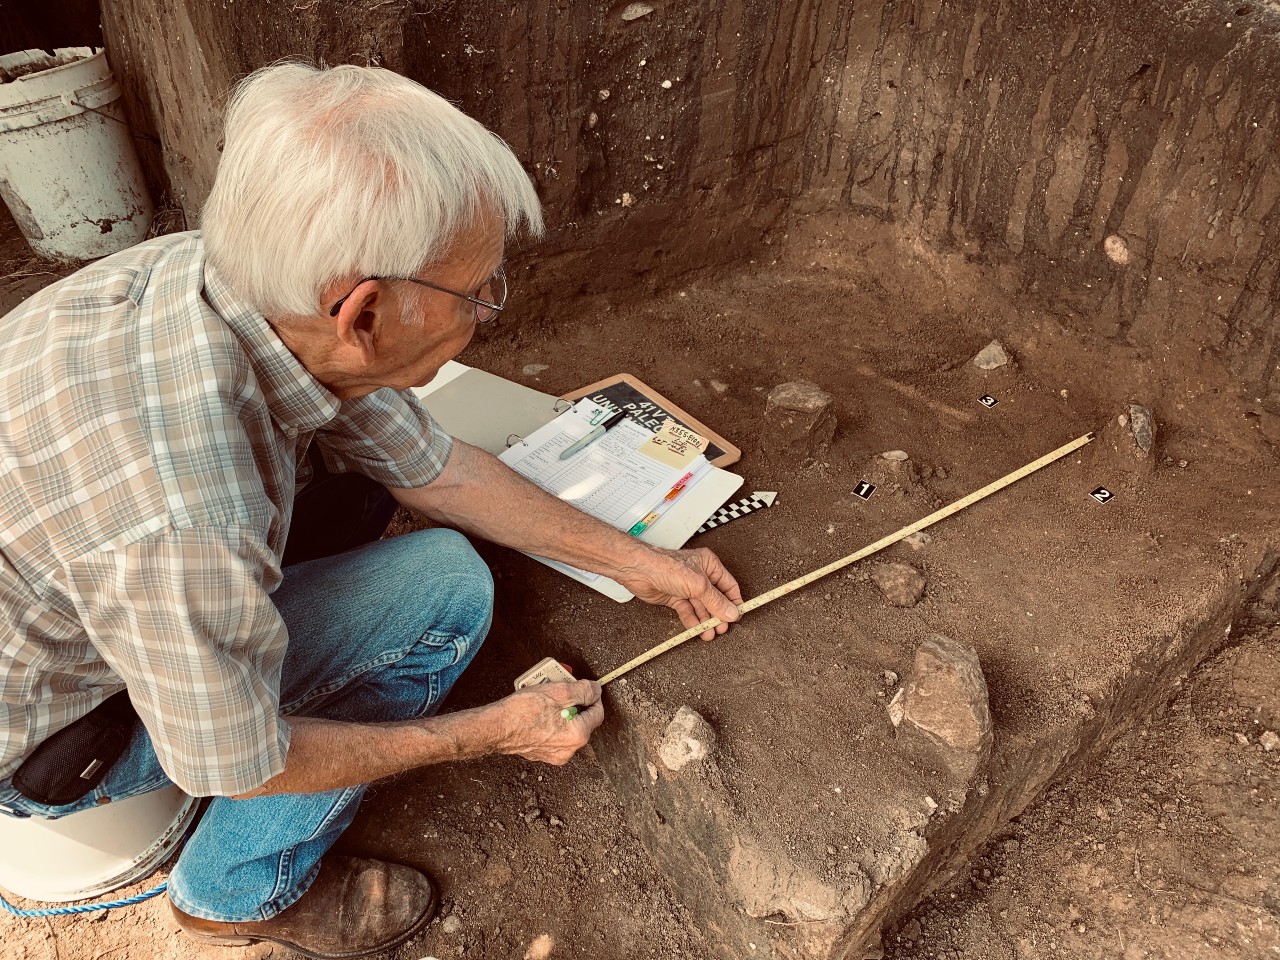 Bill Birmingham, an archaeological steward, records artifacts in situ at the McNeill Ranch Site.